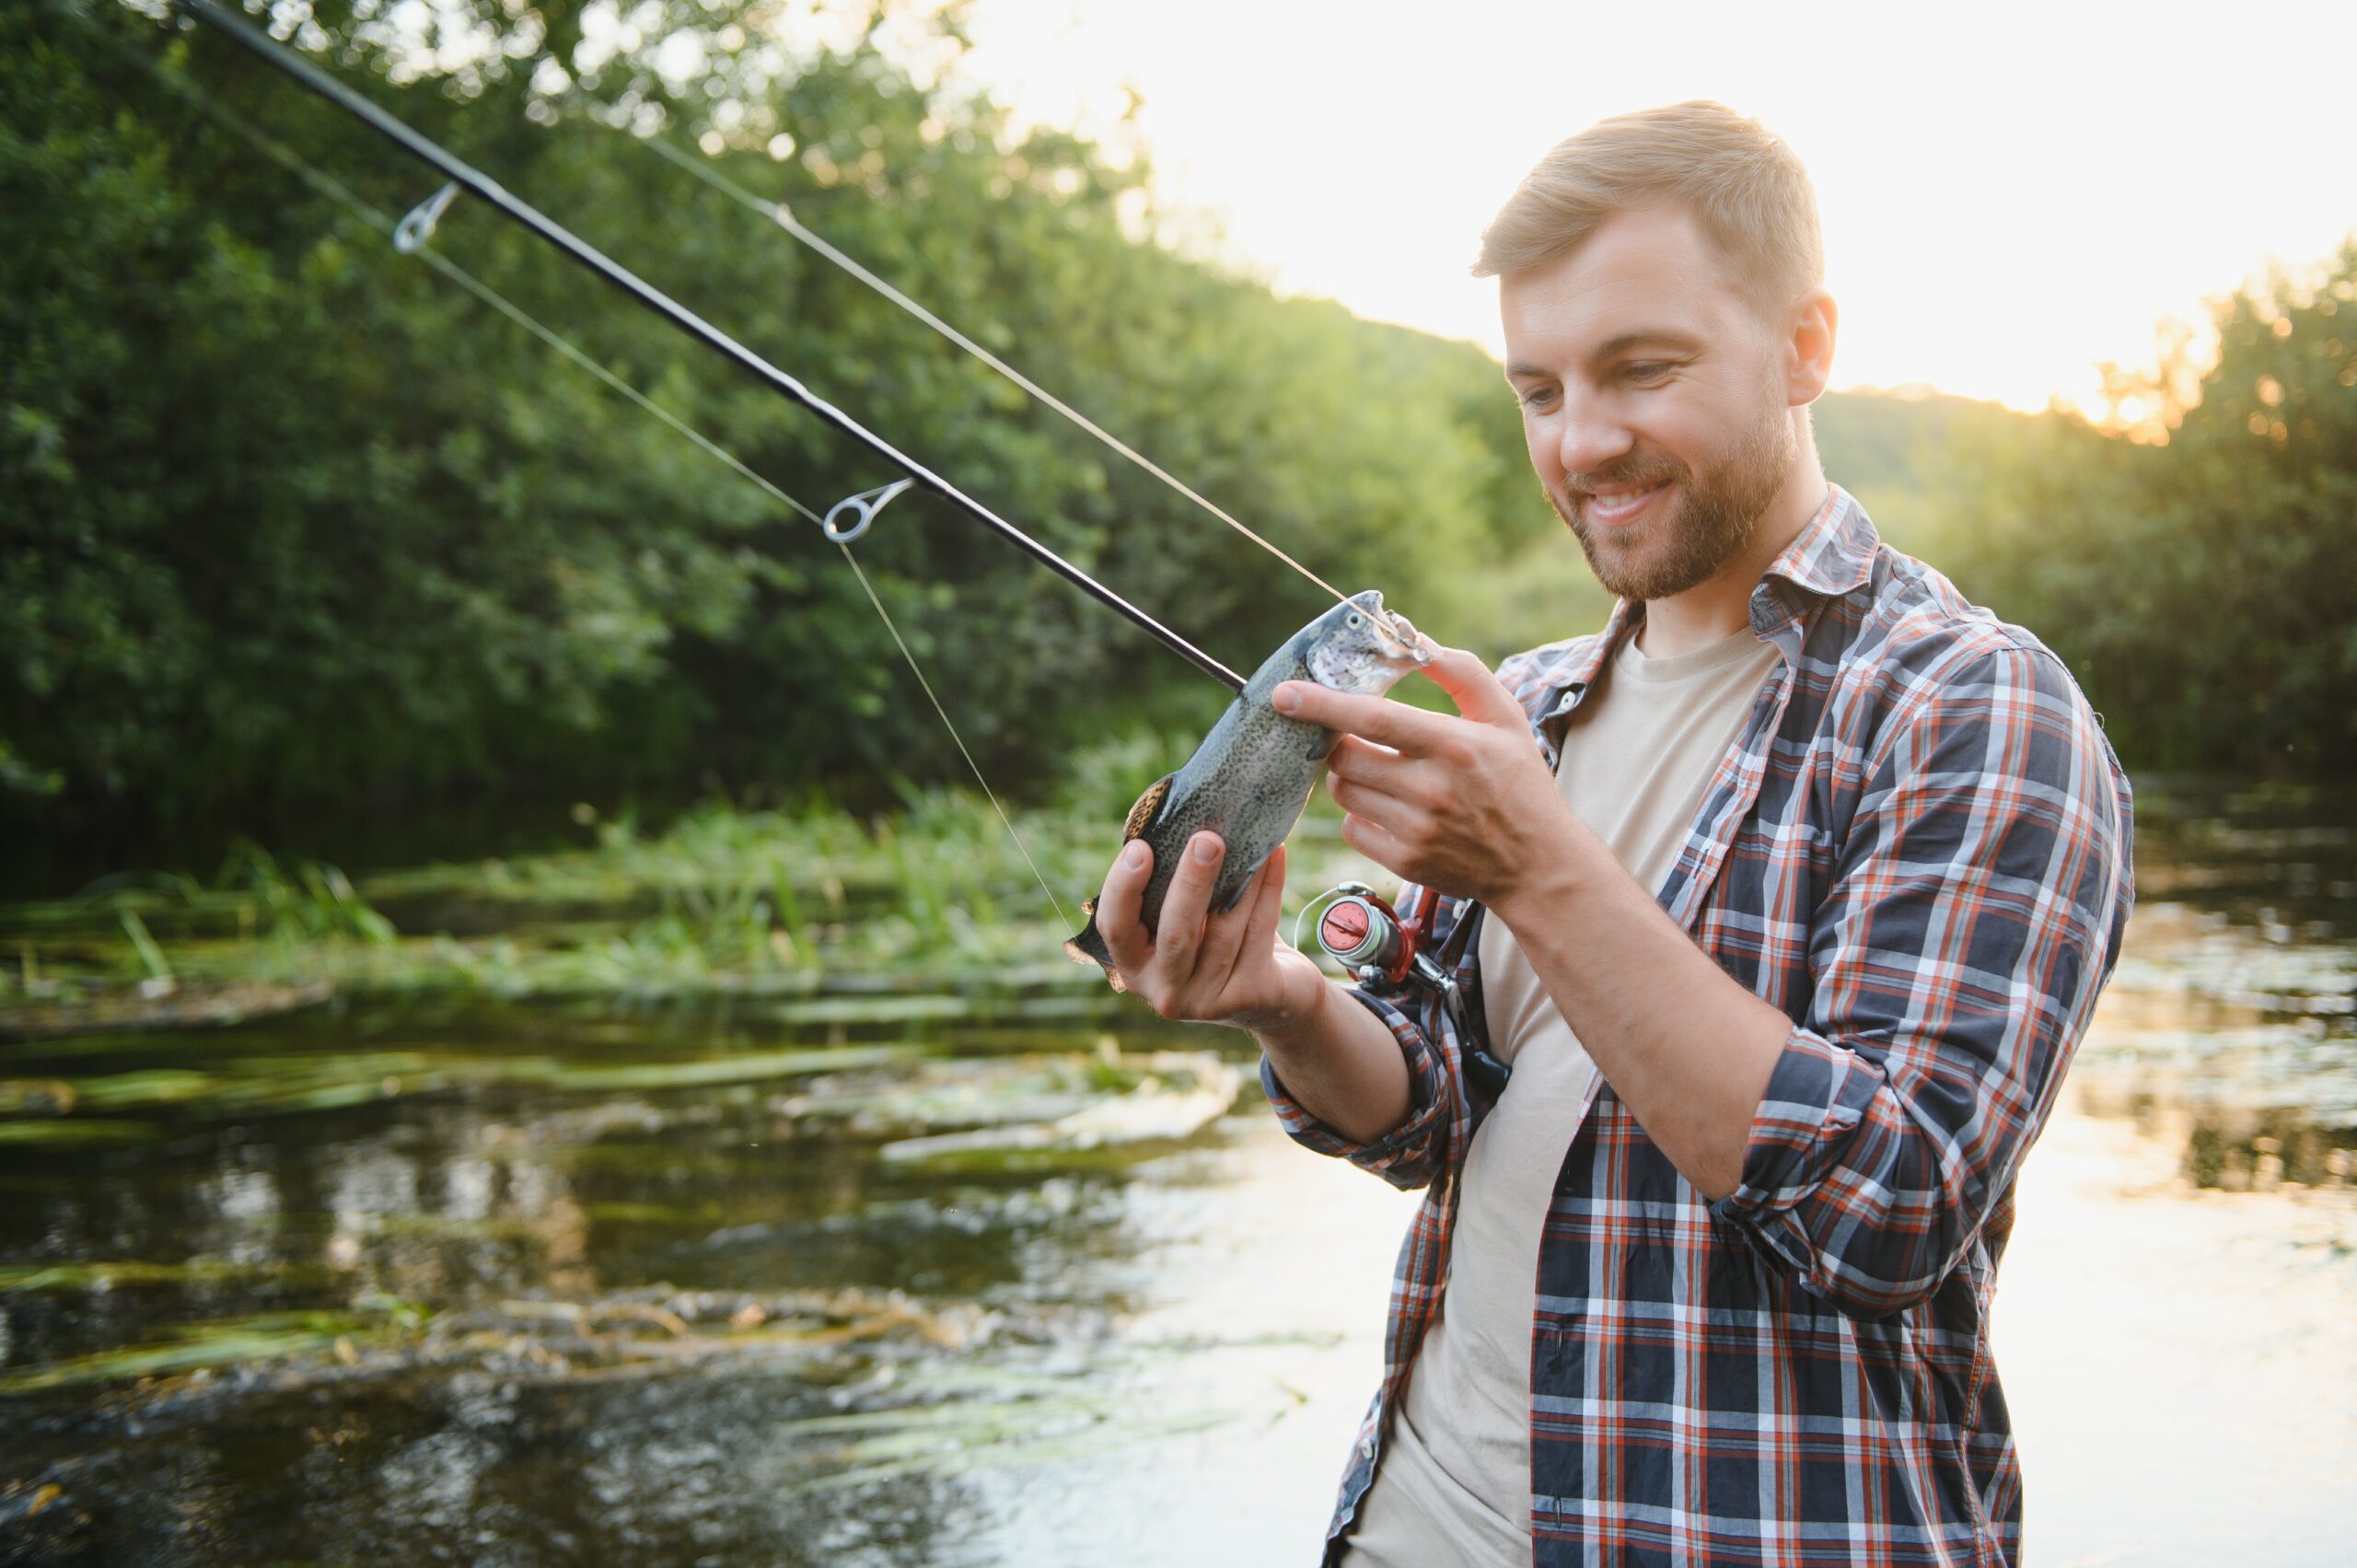 fanatic4fishing.com : What is the difference between cheap and expensive fishing rods?